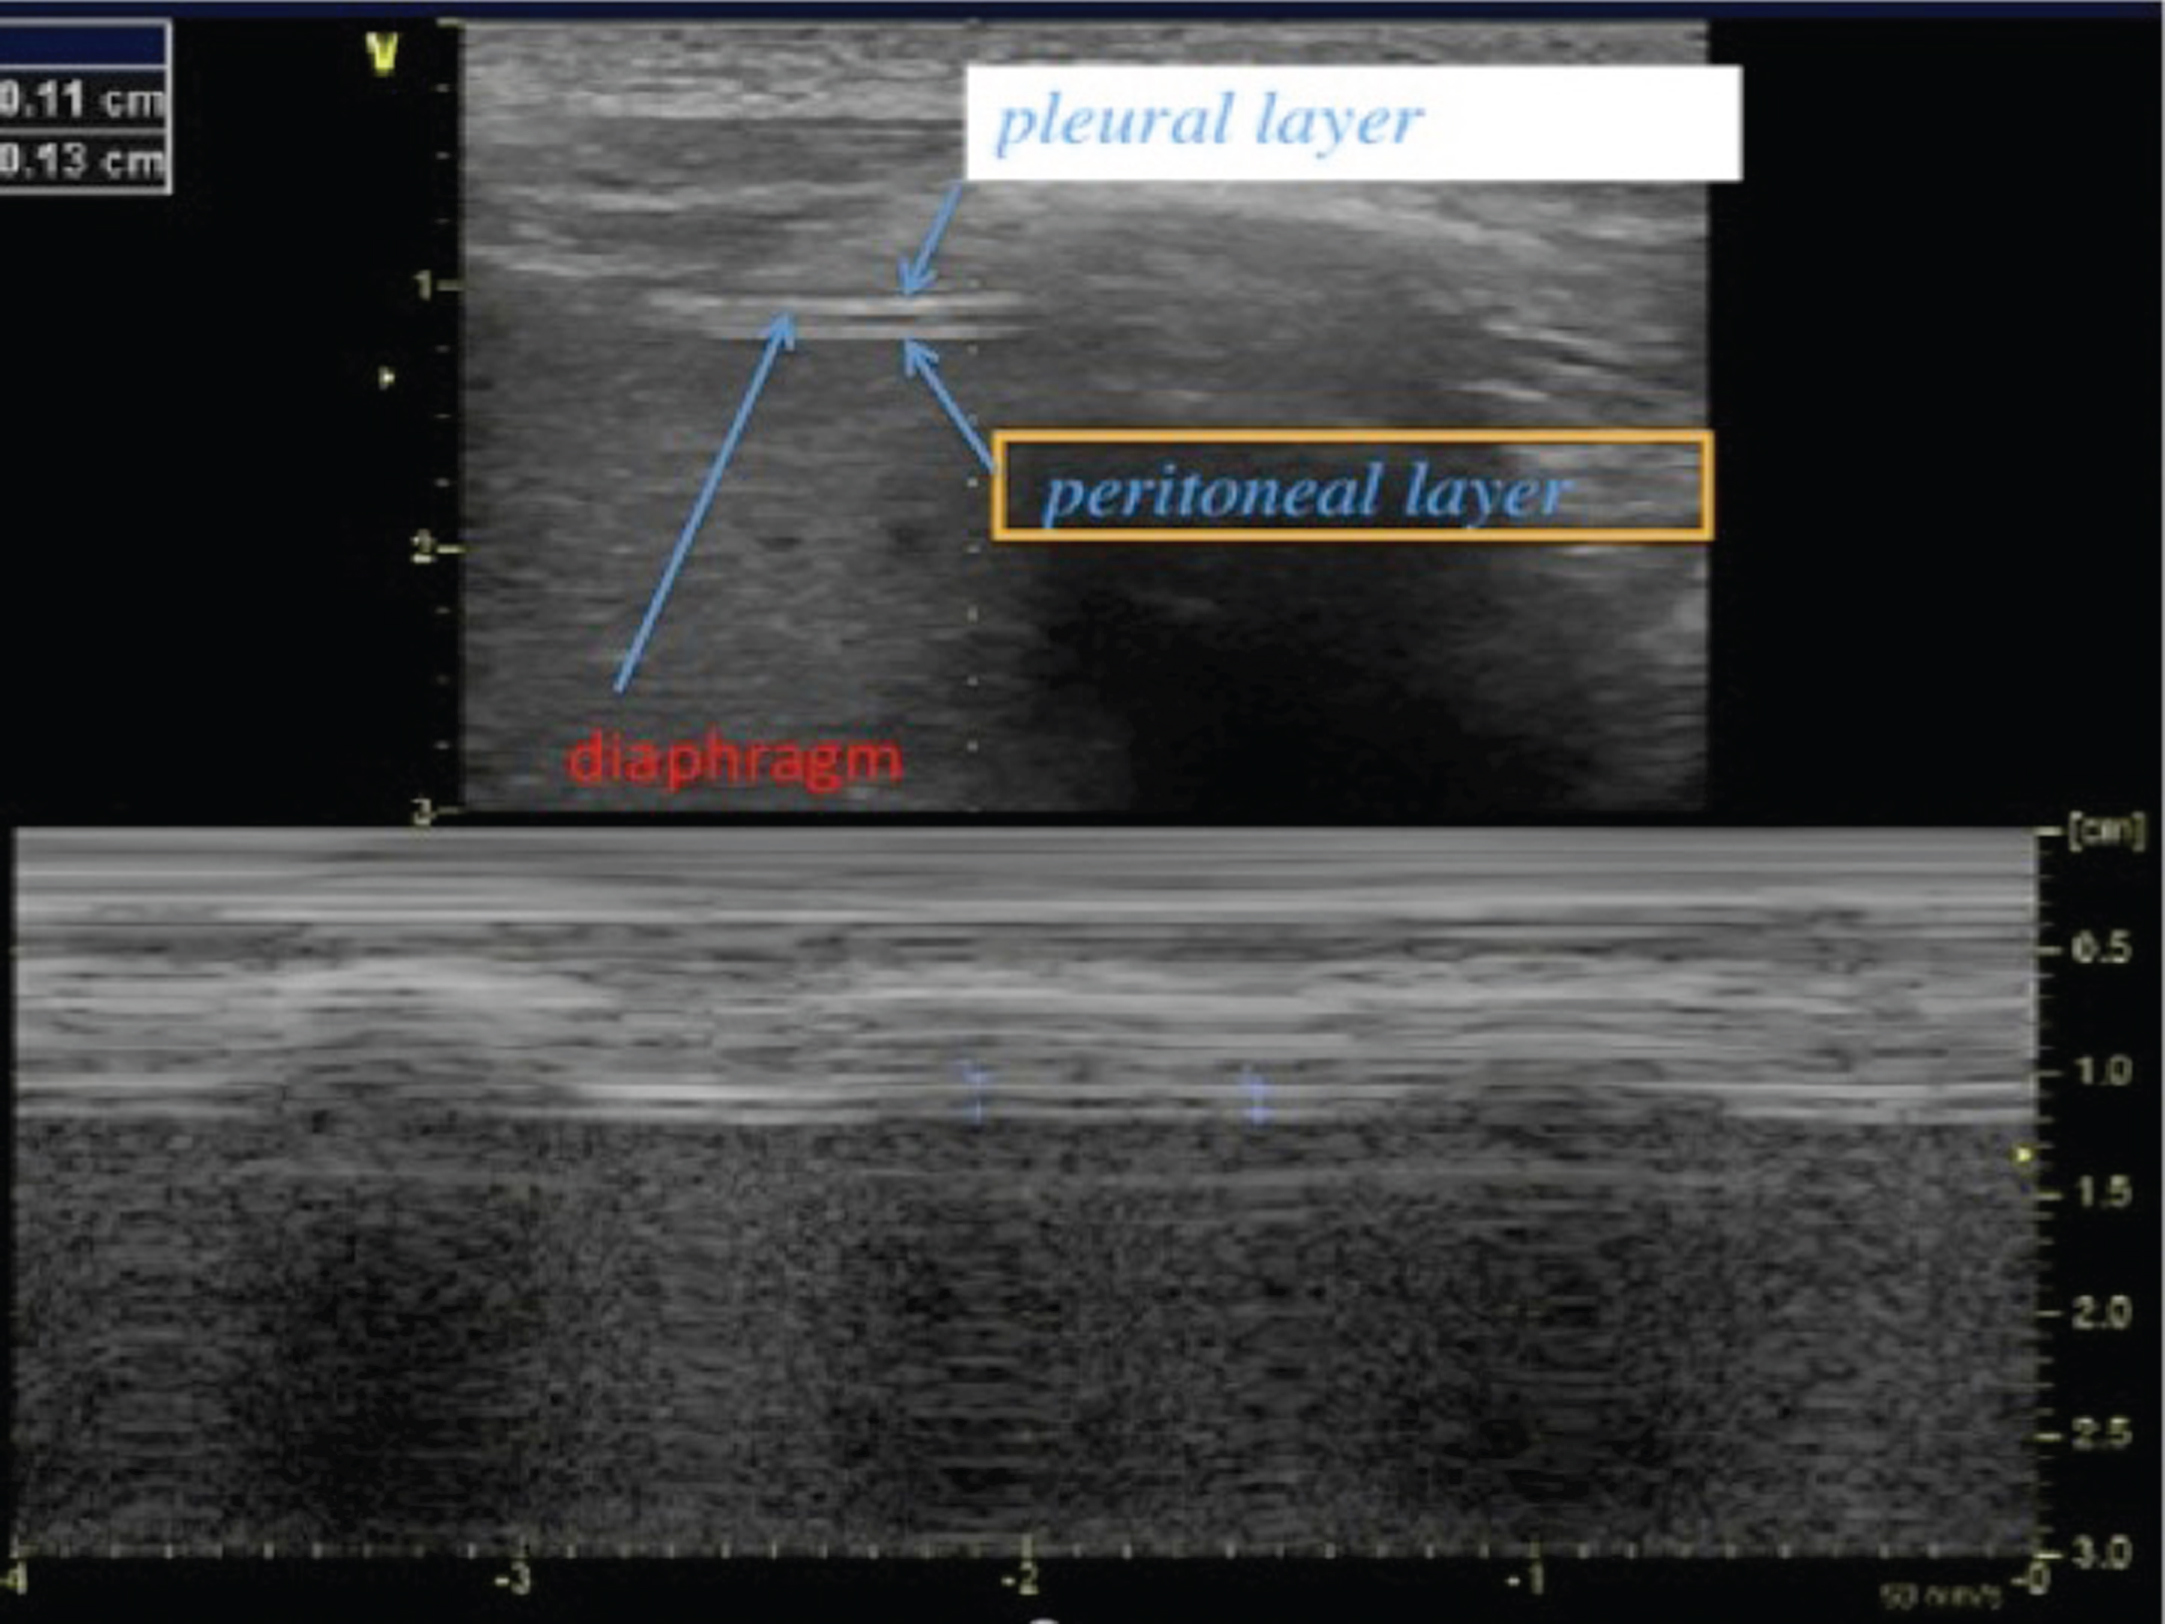 2D mode ultrasound imaging from the zone of apposition for the measurement of diaphragm thickness. The diaphragm is located beneath the intercostal muscles and we can distinguish three layers: a hypo-echogenic thick layer (diaphragm muscle) surrounded by two hyper-echogenic lines (pleural layer and peritoneal layer). Here is a reduced diaphragm thickness (1.3 mm) in a patient with Duchenne muscular dystrophy.